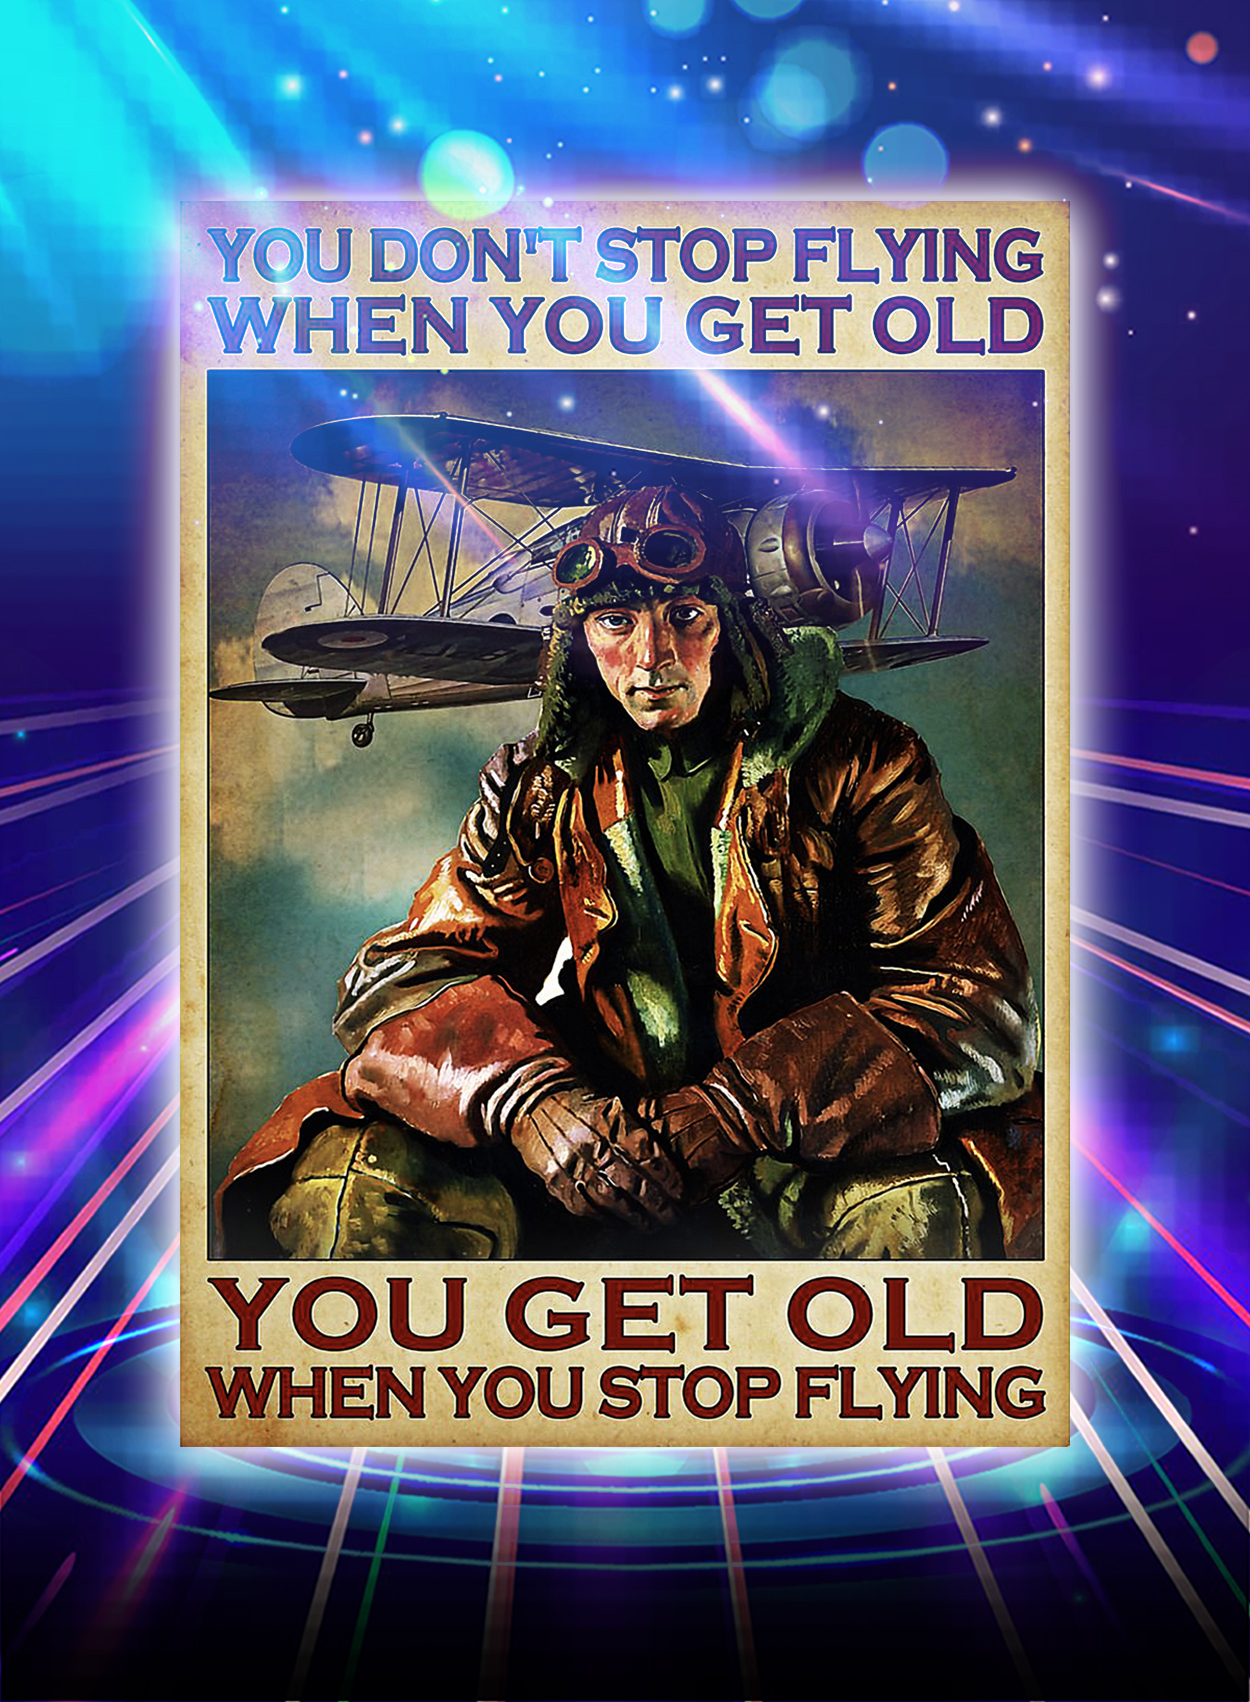 YOU DON'T STOP FLYING WHEN YOU GET OLD PILOT POSTER - A2